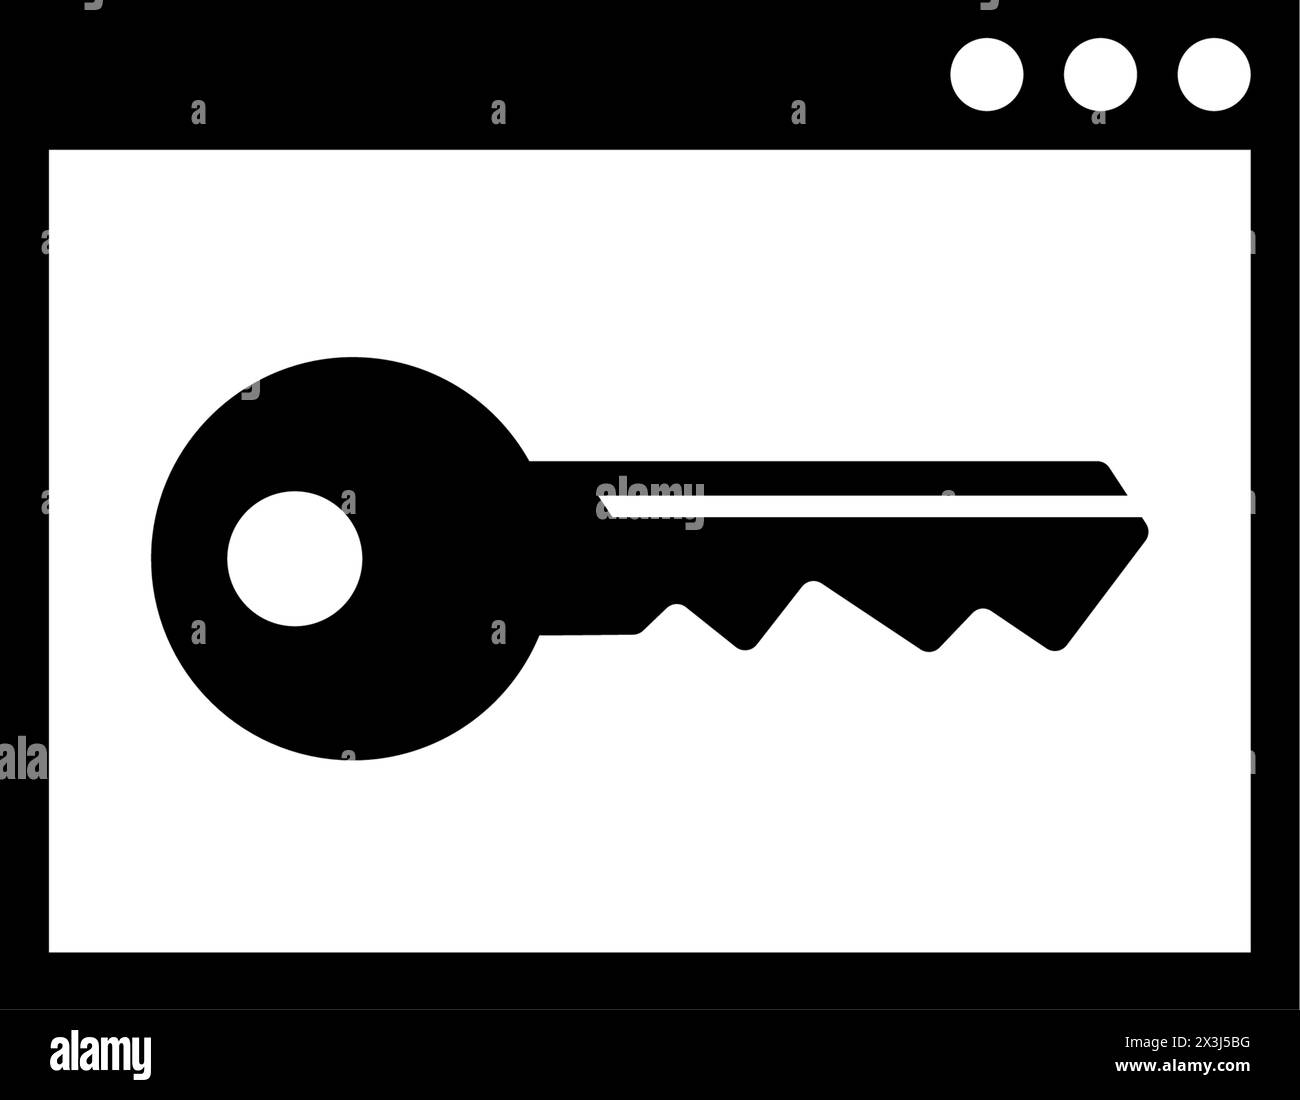 A black and white icon of a key in a browser window, with a tire tread pattern on the key. Perfect for automotive design logos and branding. Vector ic Stock Vector